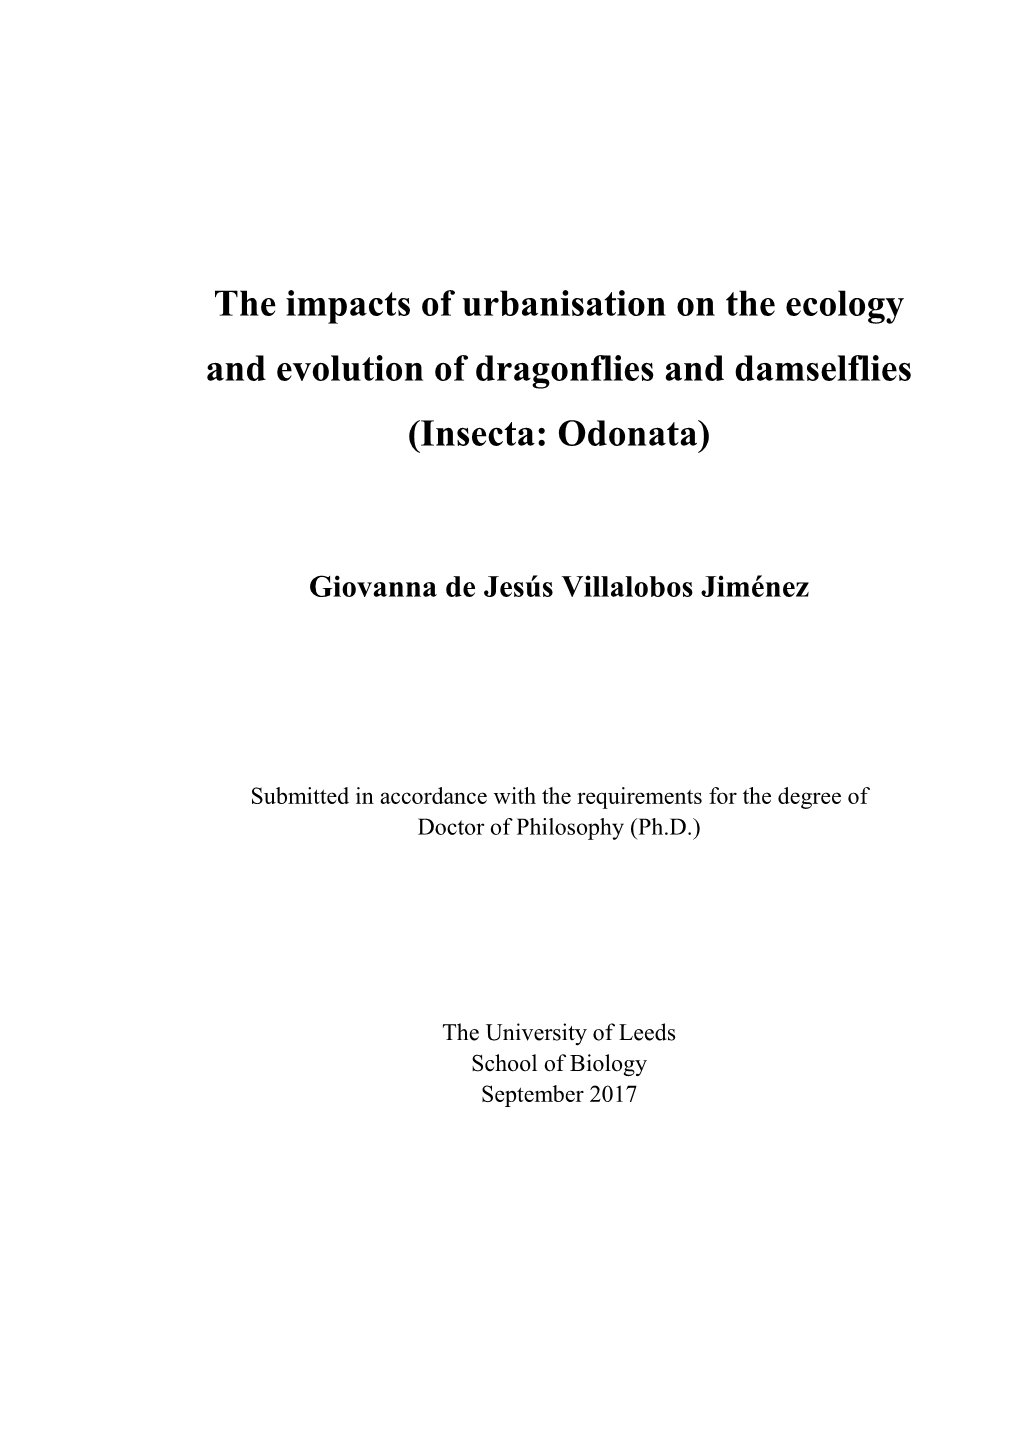 The Impacts of Urbanisation on the Ecology and Evolution of Dragonflies and Damselflies (Insecta: Odonata)